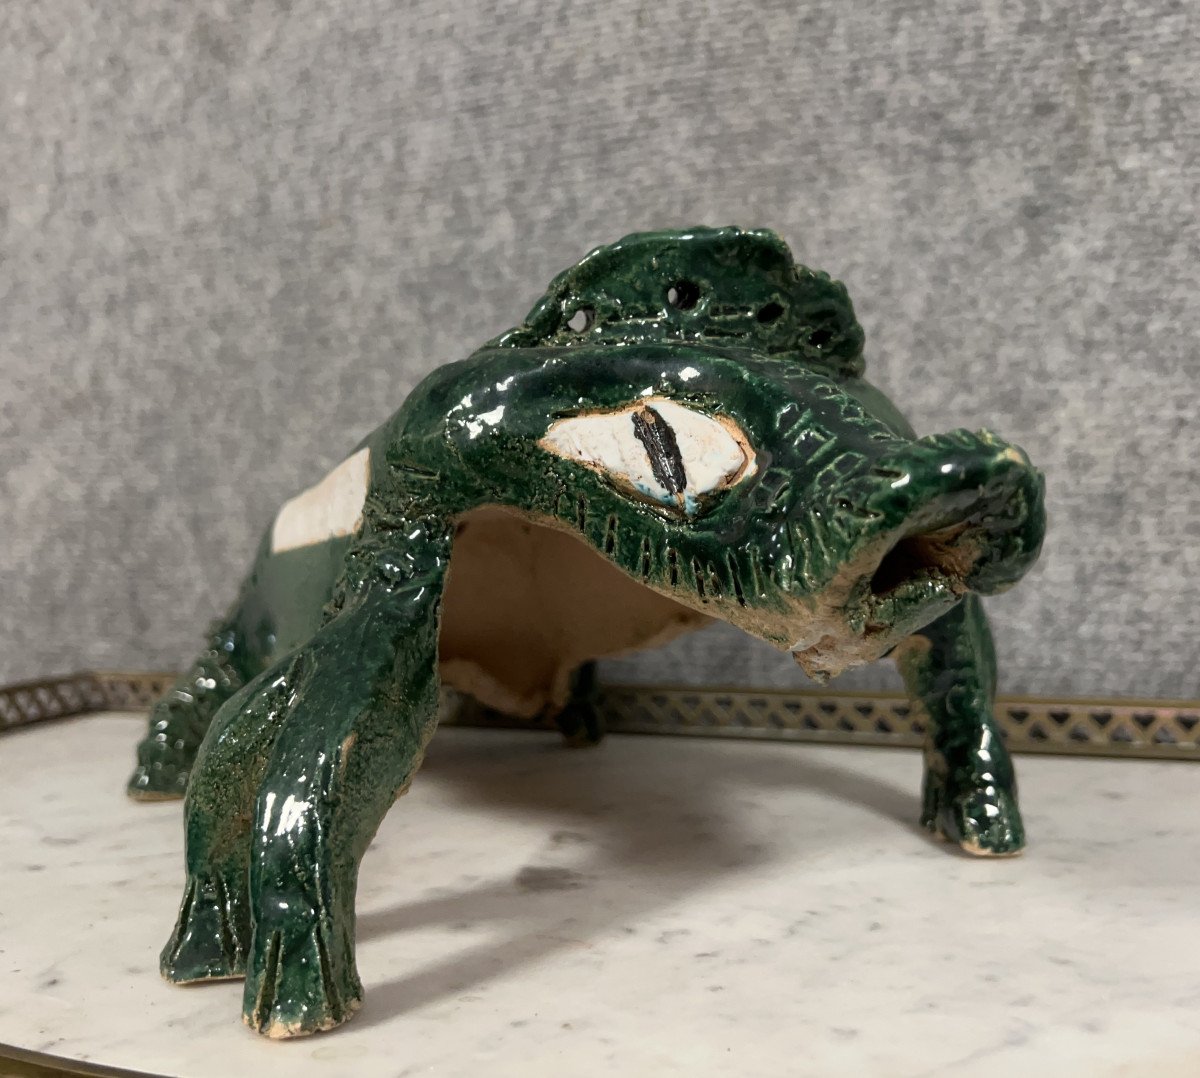 Abstract Enameled Terracotta Sculpture From The 20th Century Depicting A Fantastic Animal  -photo-3